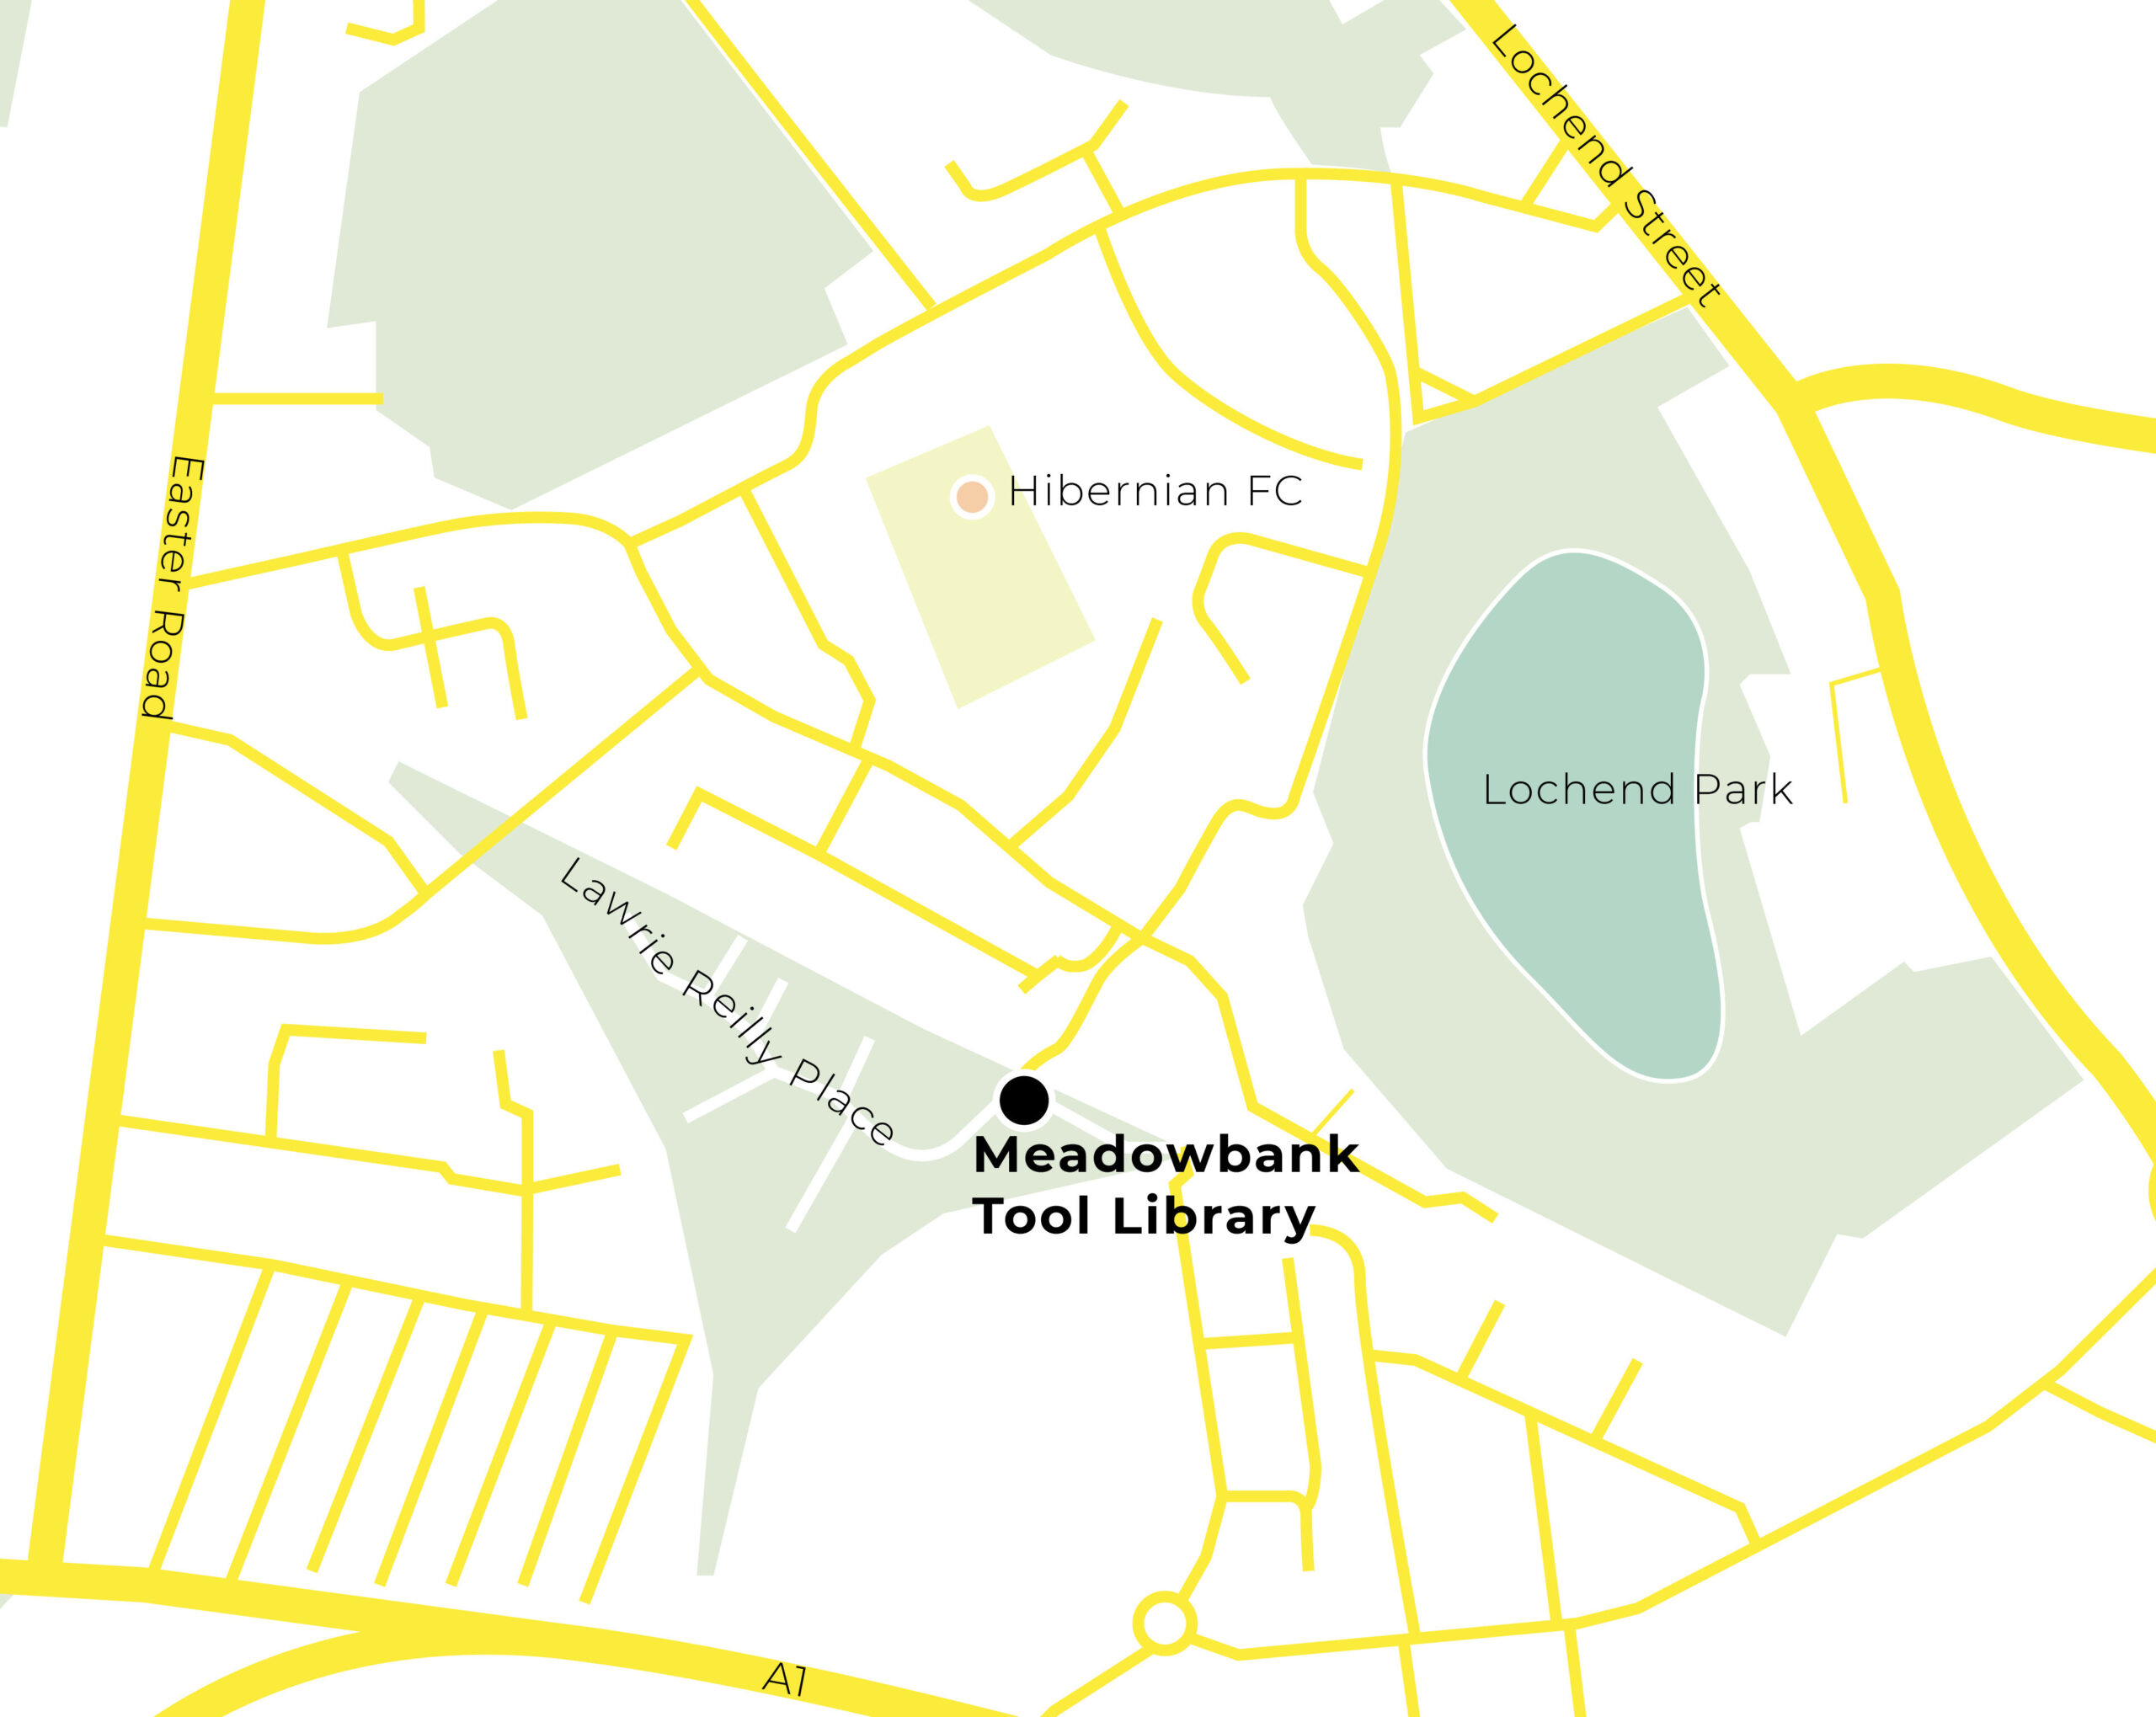 Stylised image of map showing the location of the Meadowbank Tool Library Hub